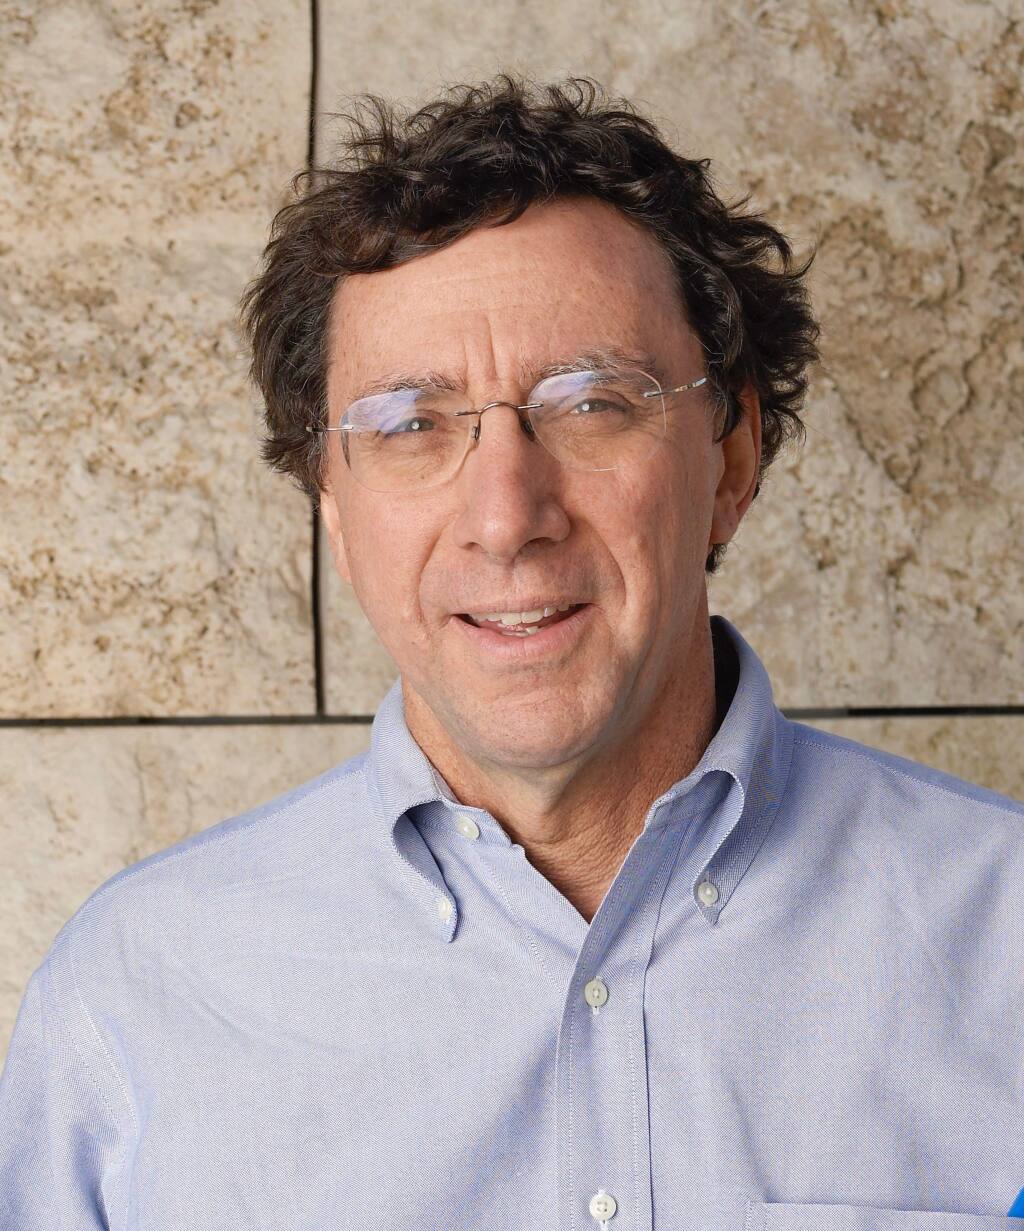 John Markoff, author of 'Machines of Loving Grace' and other books, will appear in the Sonoma Speakers Series on Monday, Feb. 6. (Submitted photo)